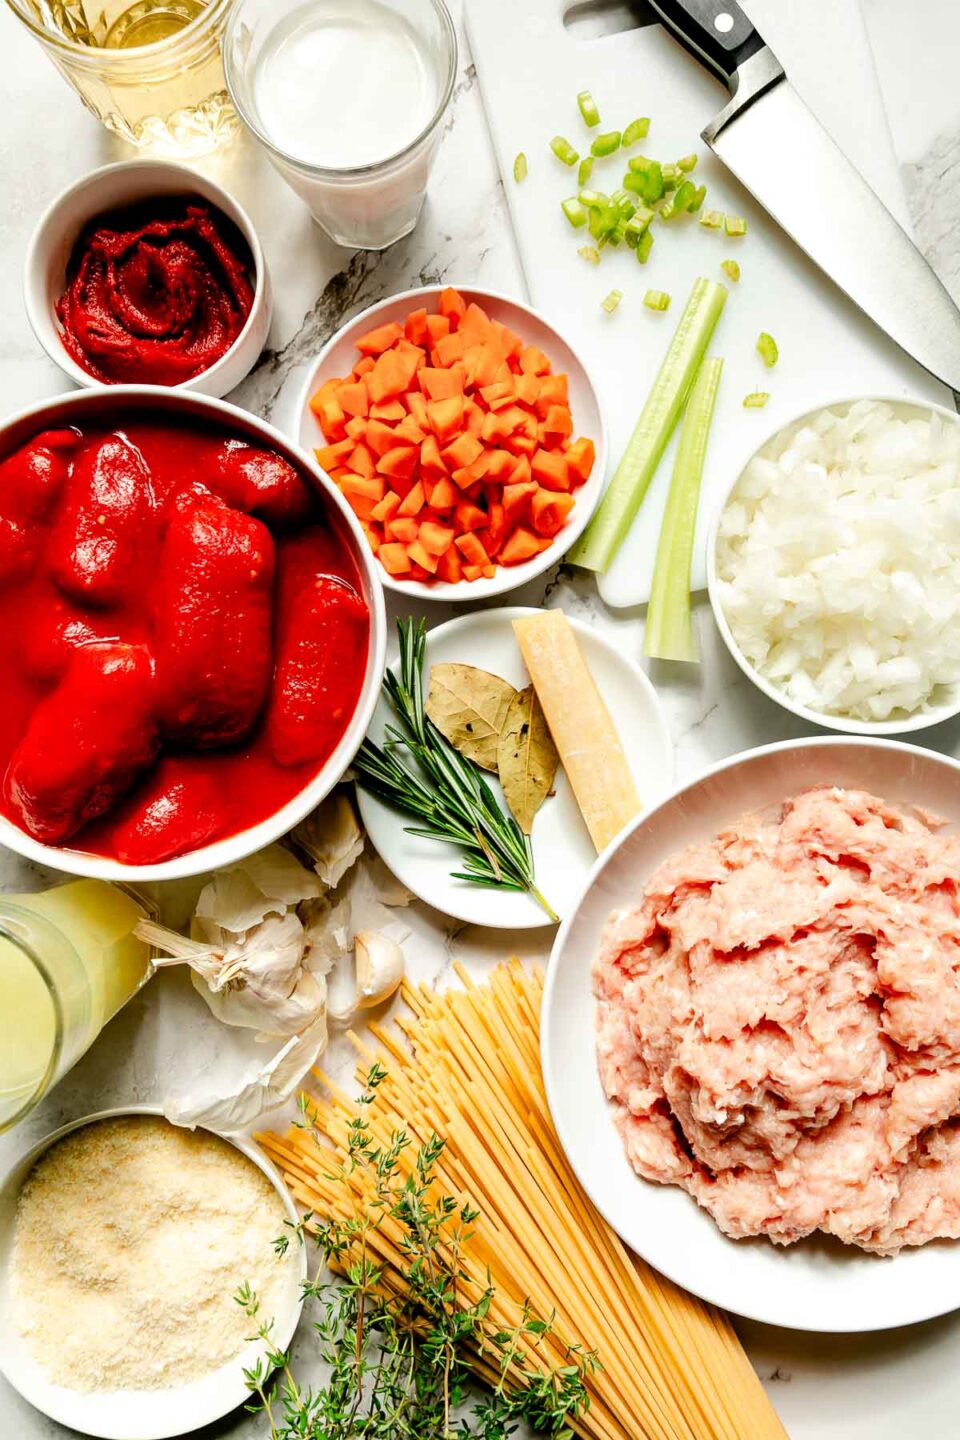 Ingredients are displayed in white dishes on a white marbled surface: ground chicken, dry bucatini, carrots, celery, onion, parmesan, white wine, tomato paste, rosemary, bay leaves, parmesan rind and garlic.